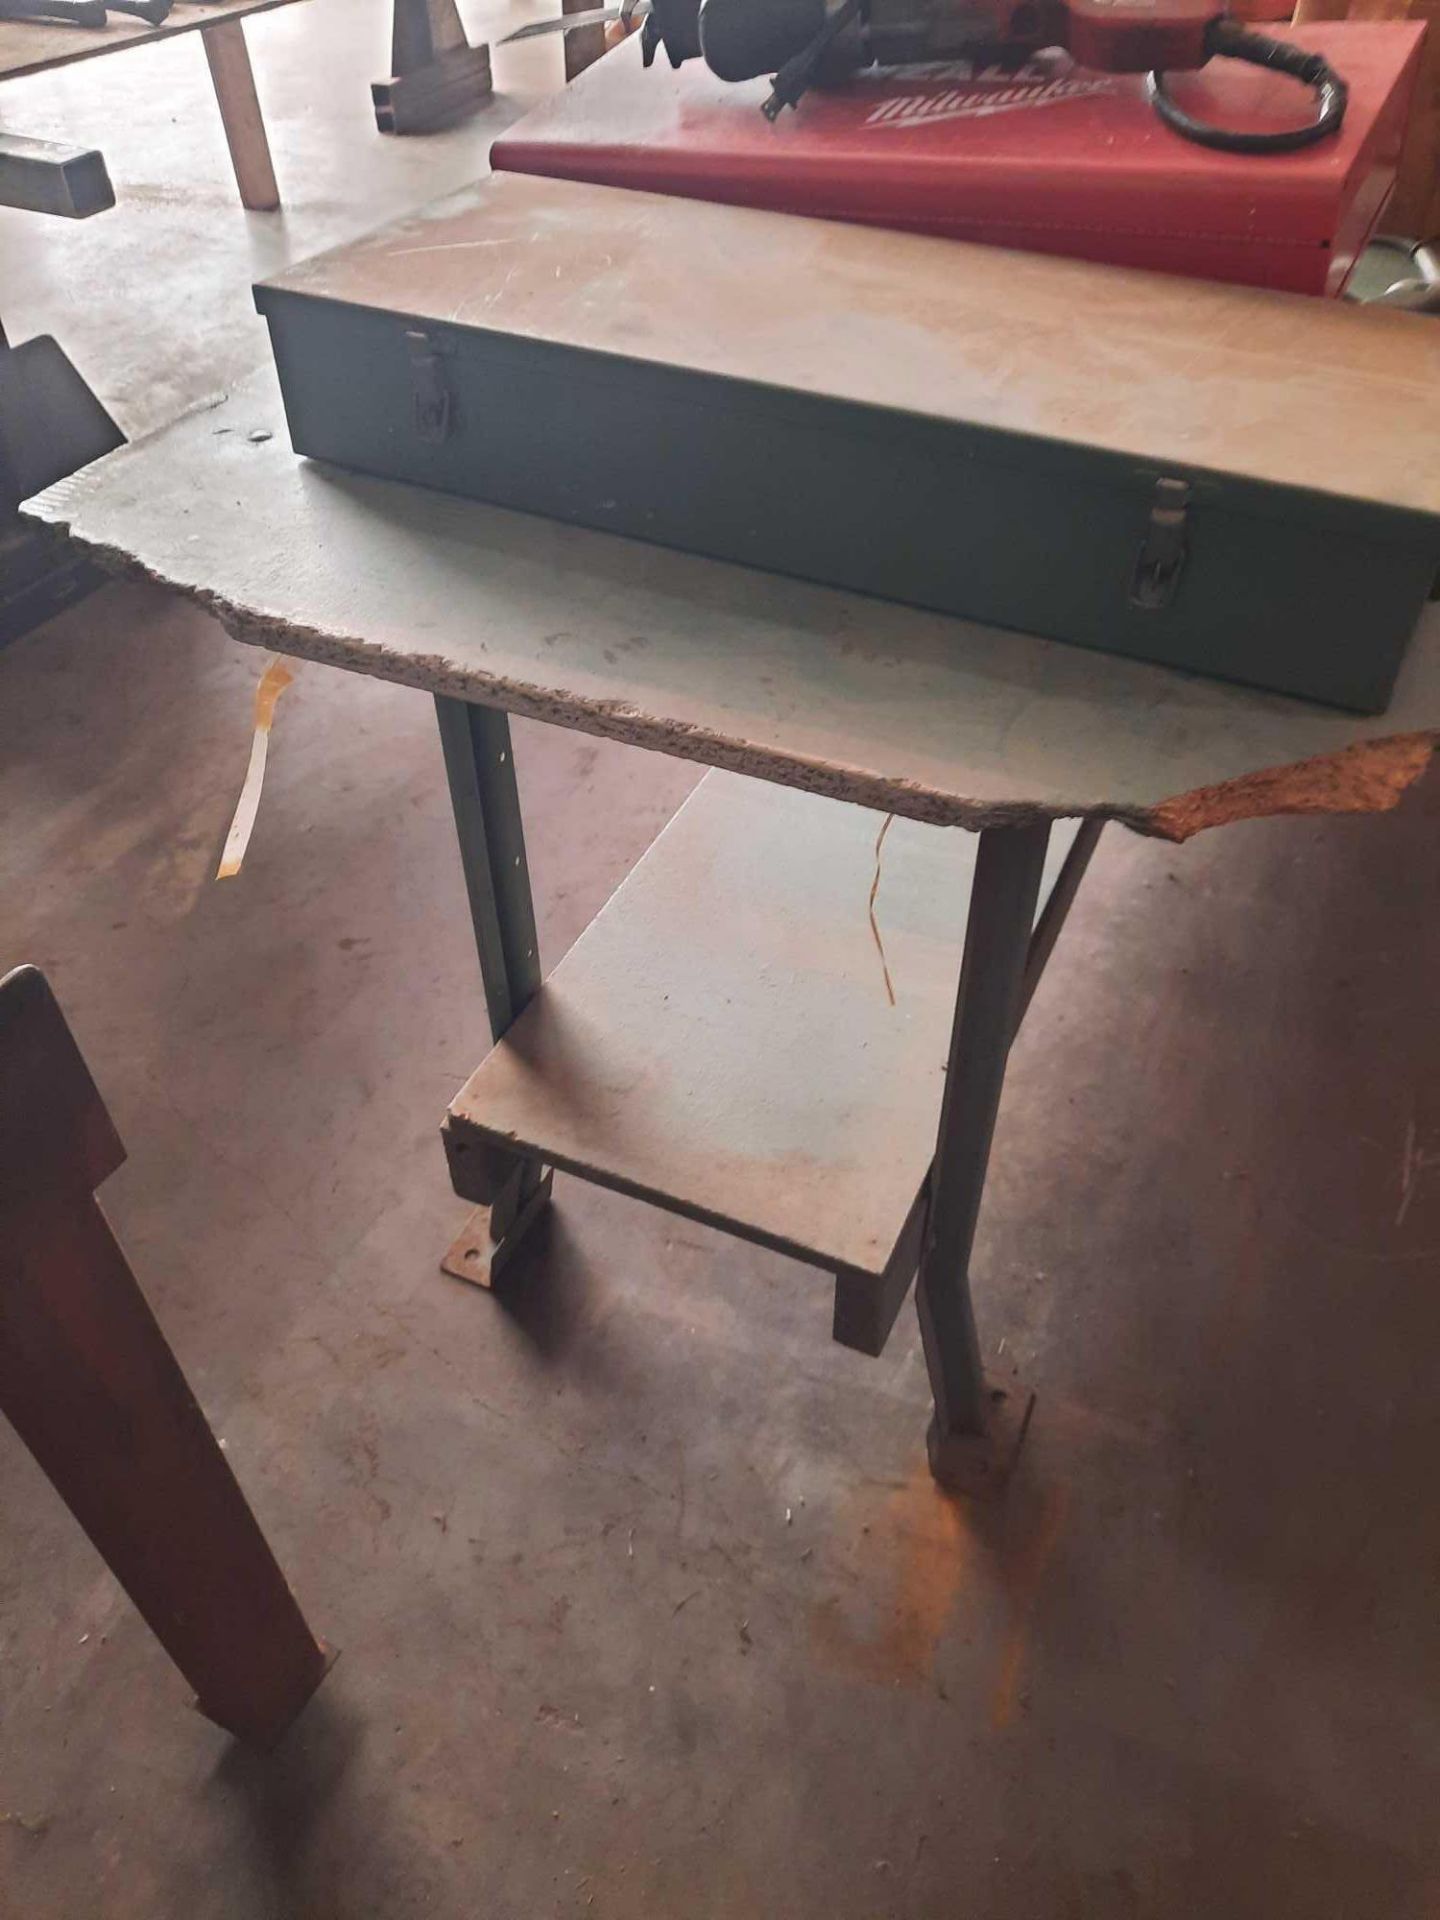 Metal leg work bench with wood top and lower shelf, 96 x 33 x 33 inches (contents not included) - Image 2 of 2